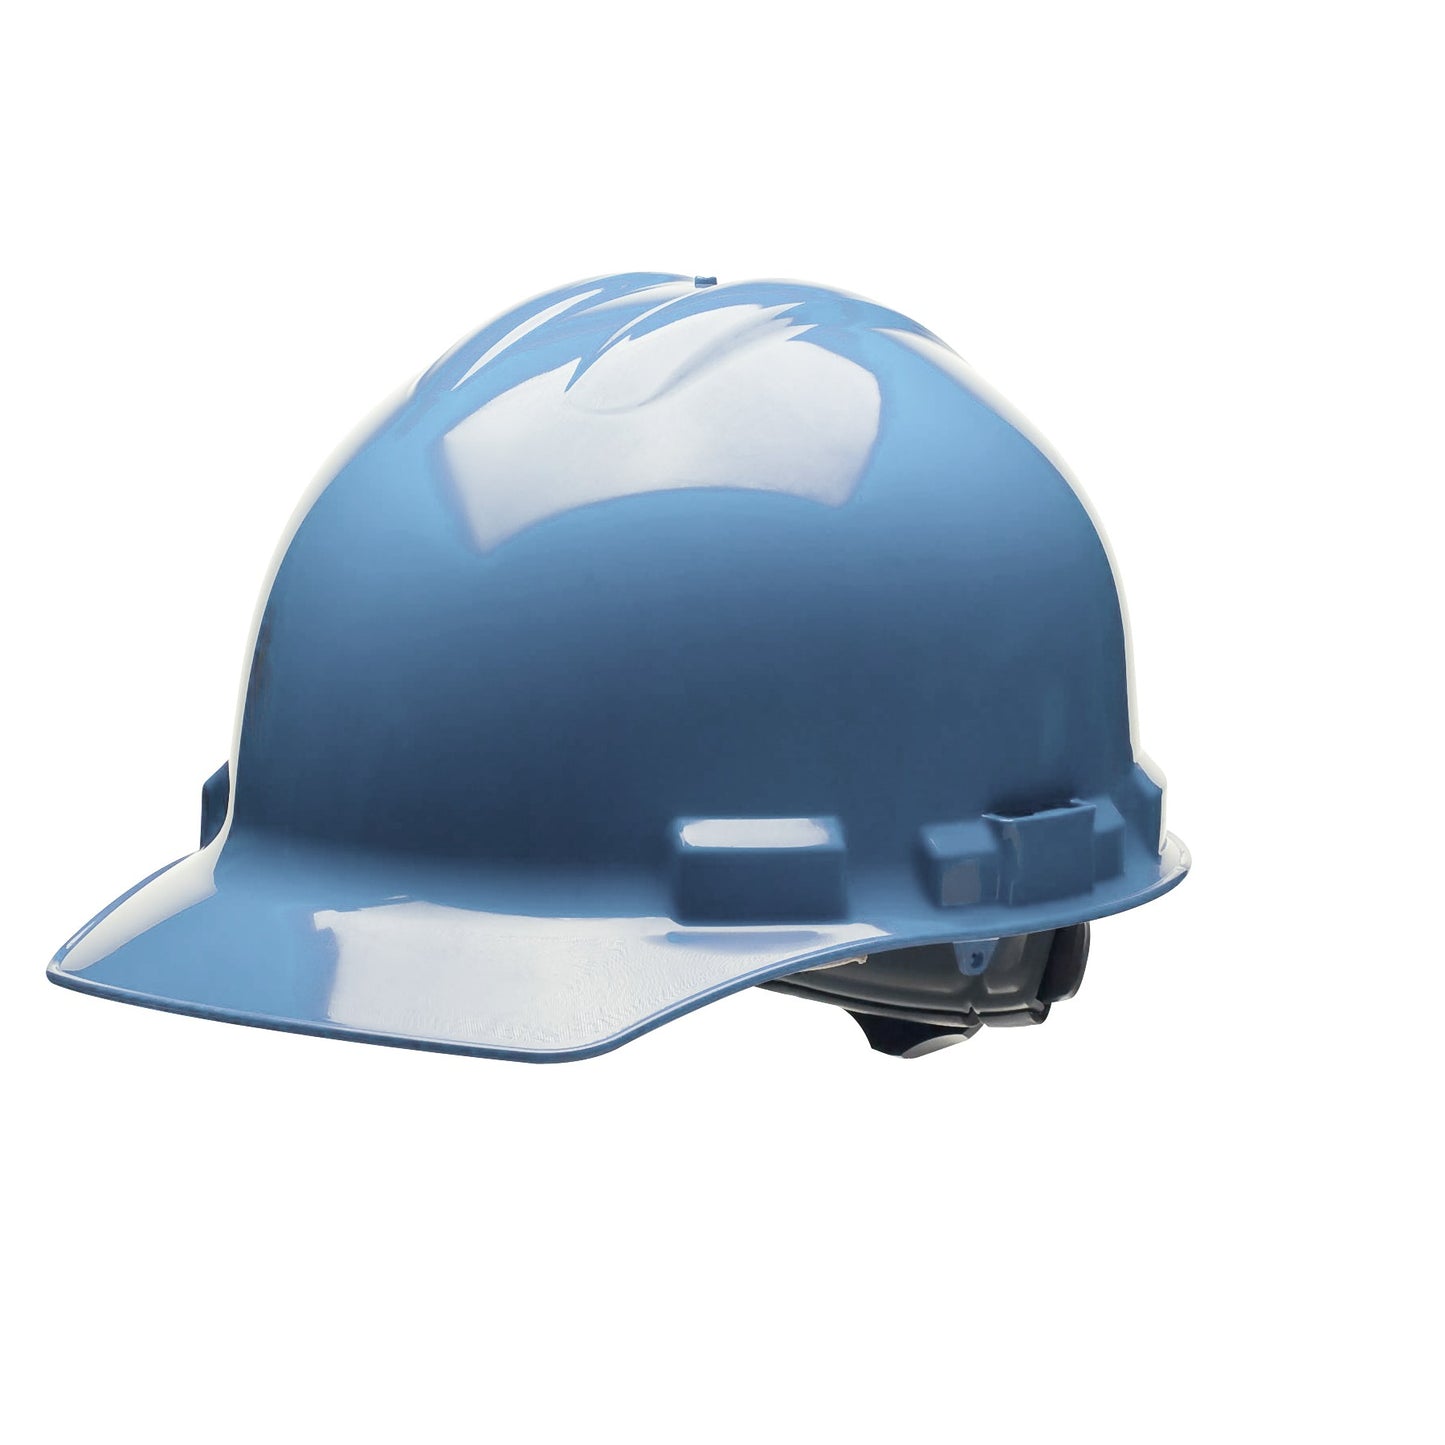 Cap-Style Hard Hat, 6-Point Ratchet Suspension, Class E and G, OSHA Approved Hard Hat